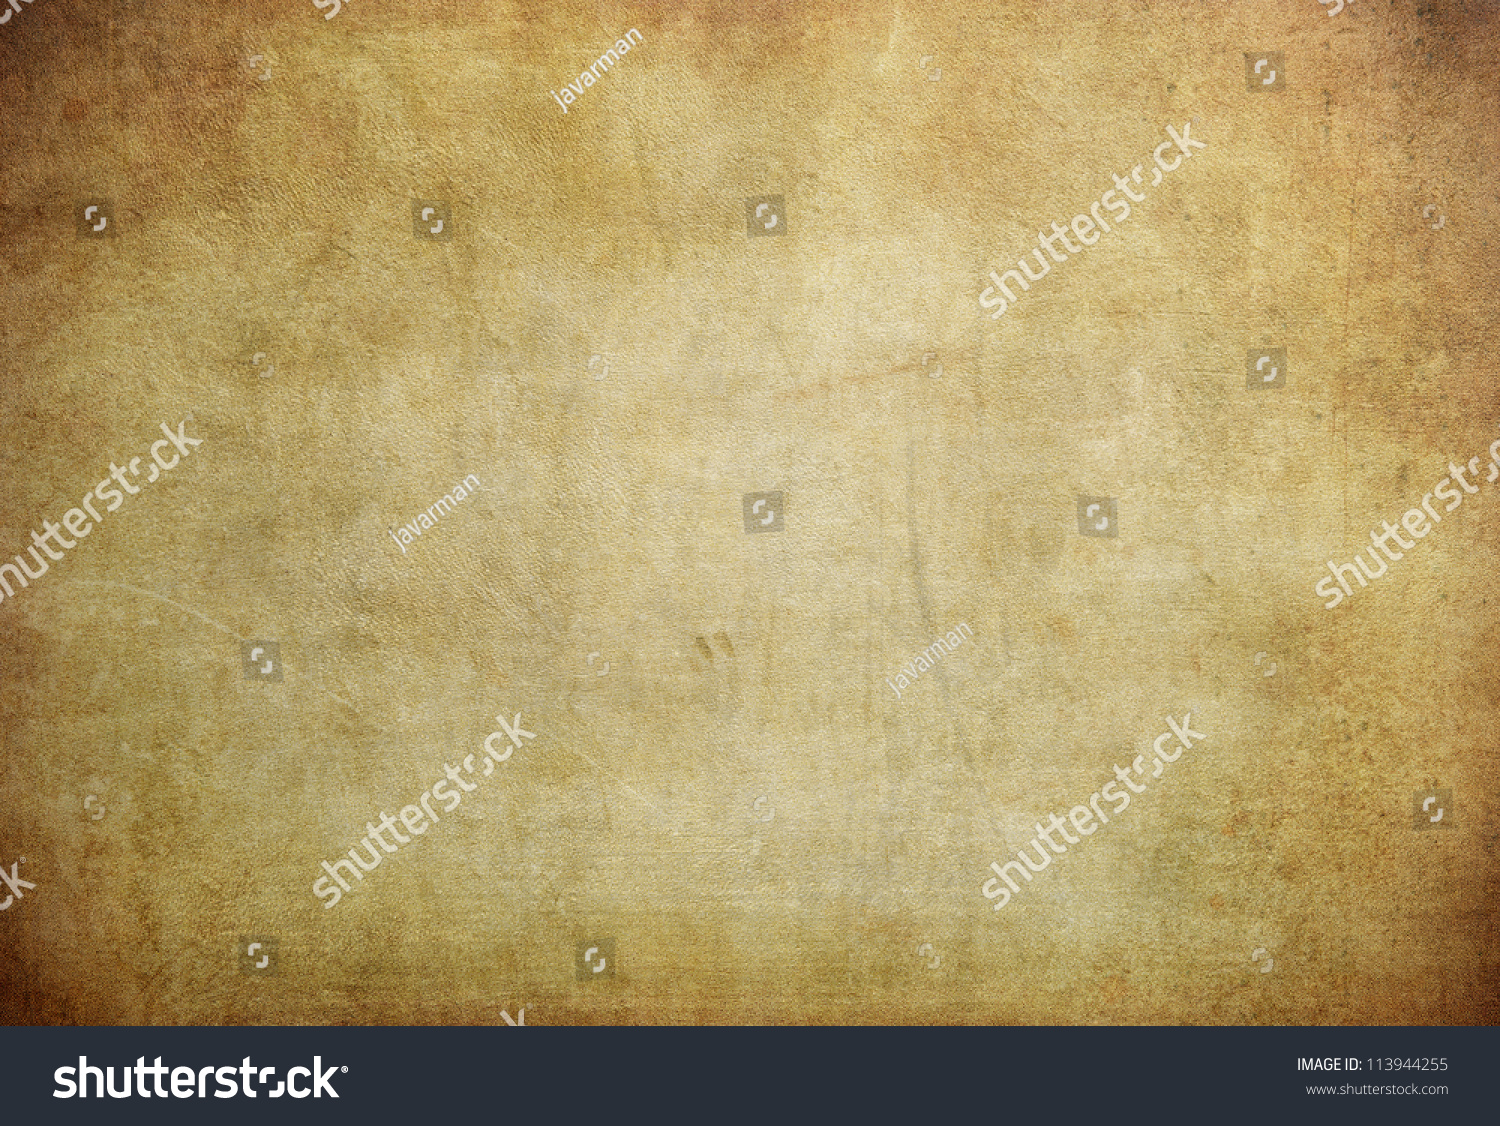 grunge background with space for text or image #113944255